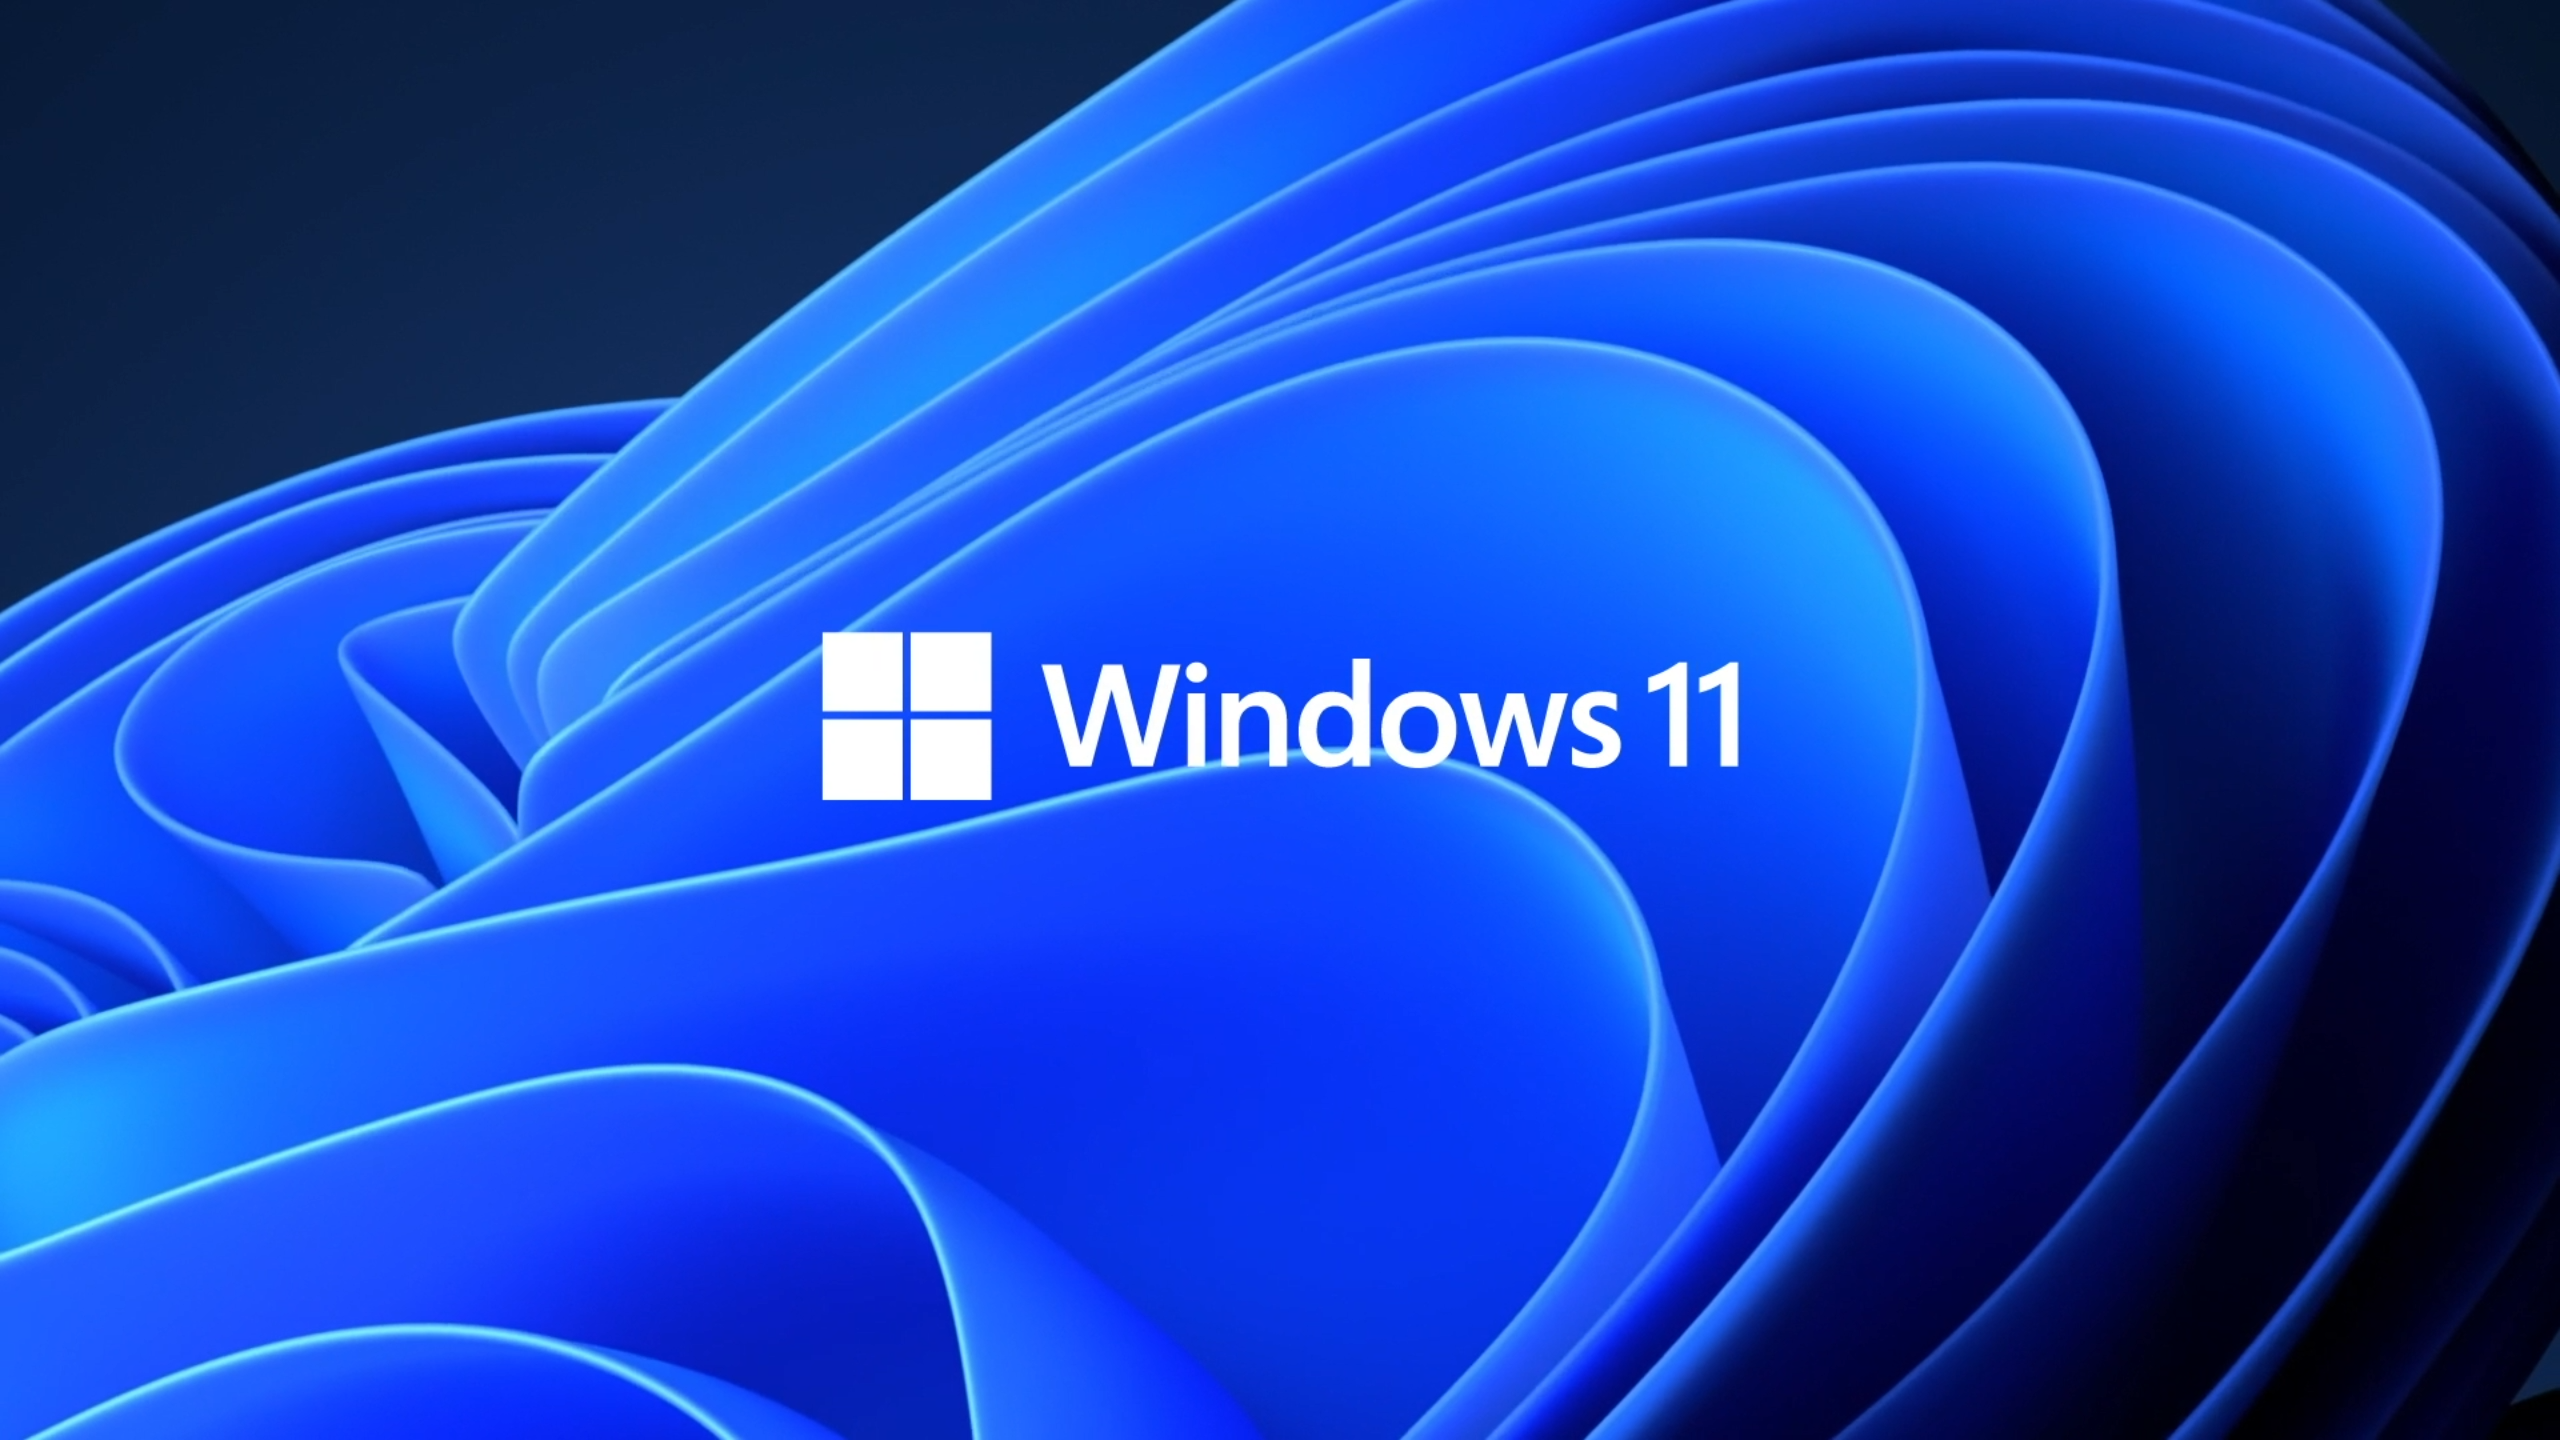 Windows 11: Everything You Need to Know